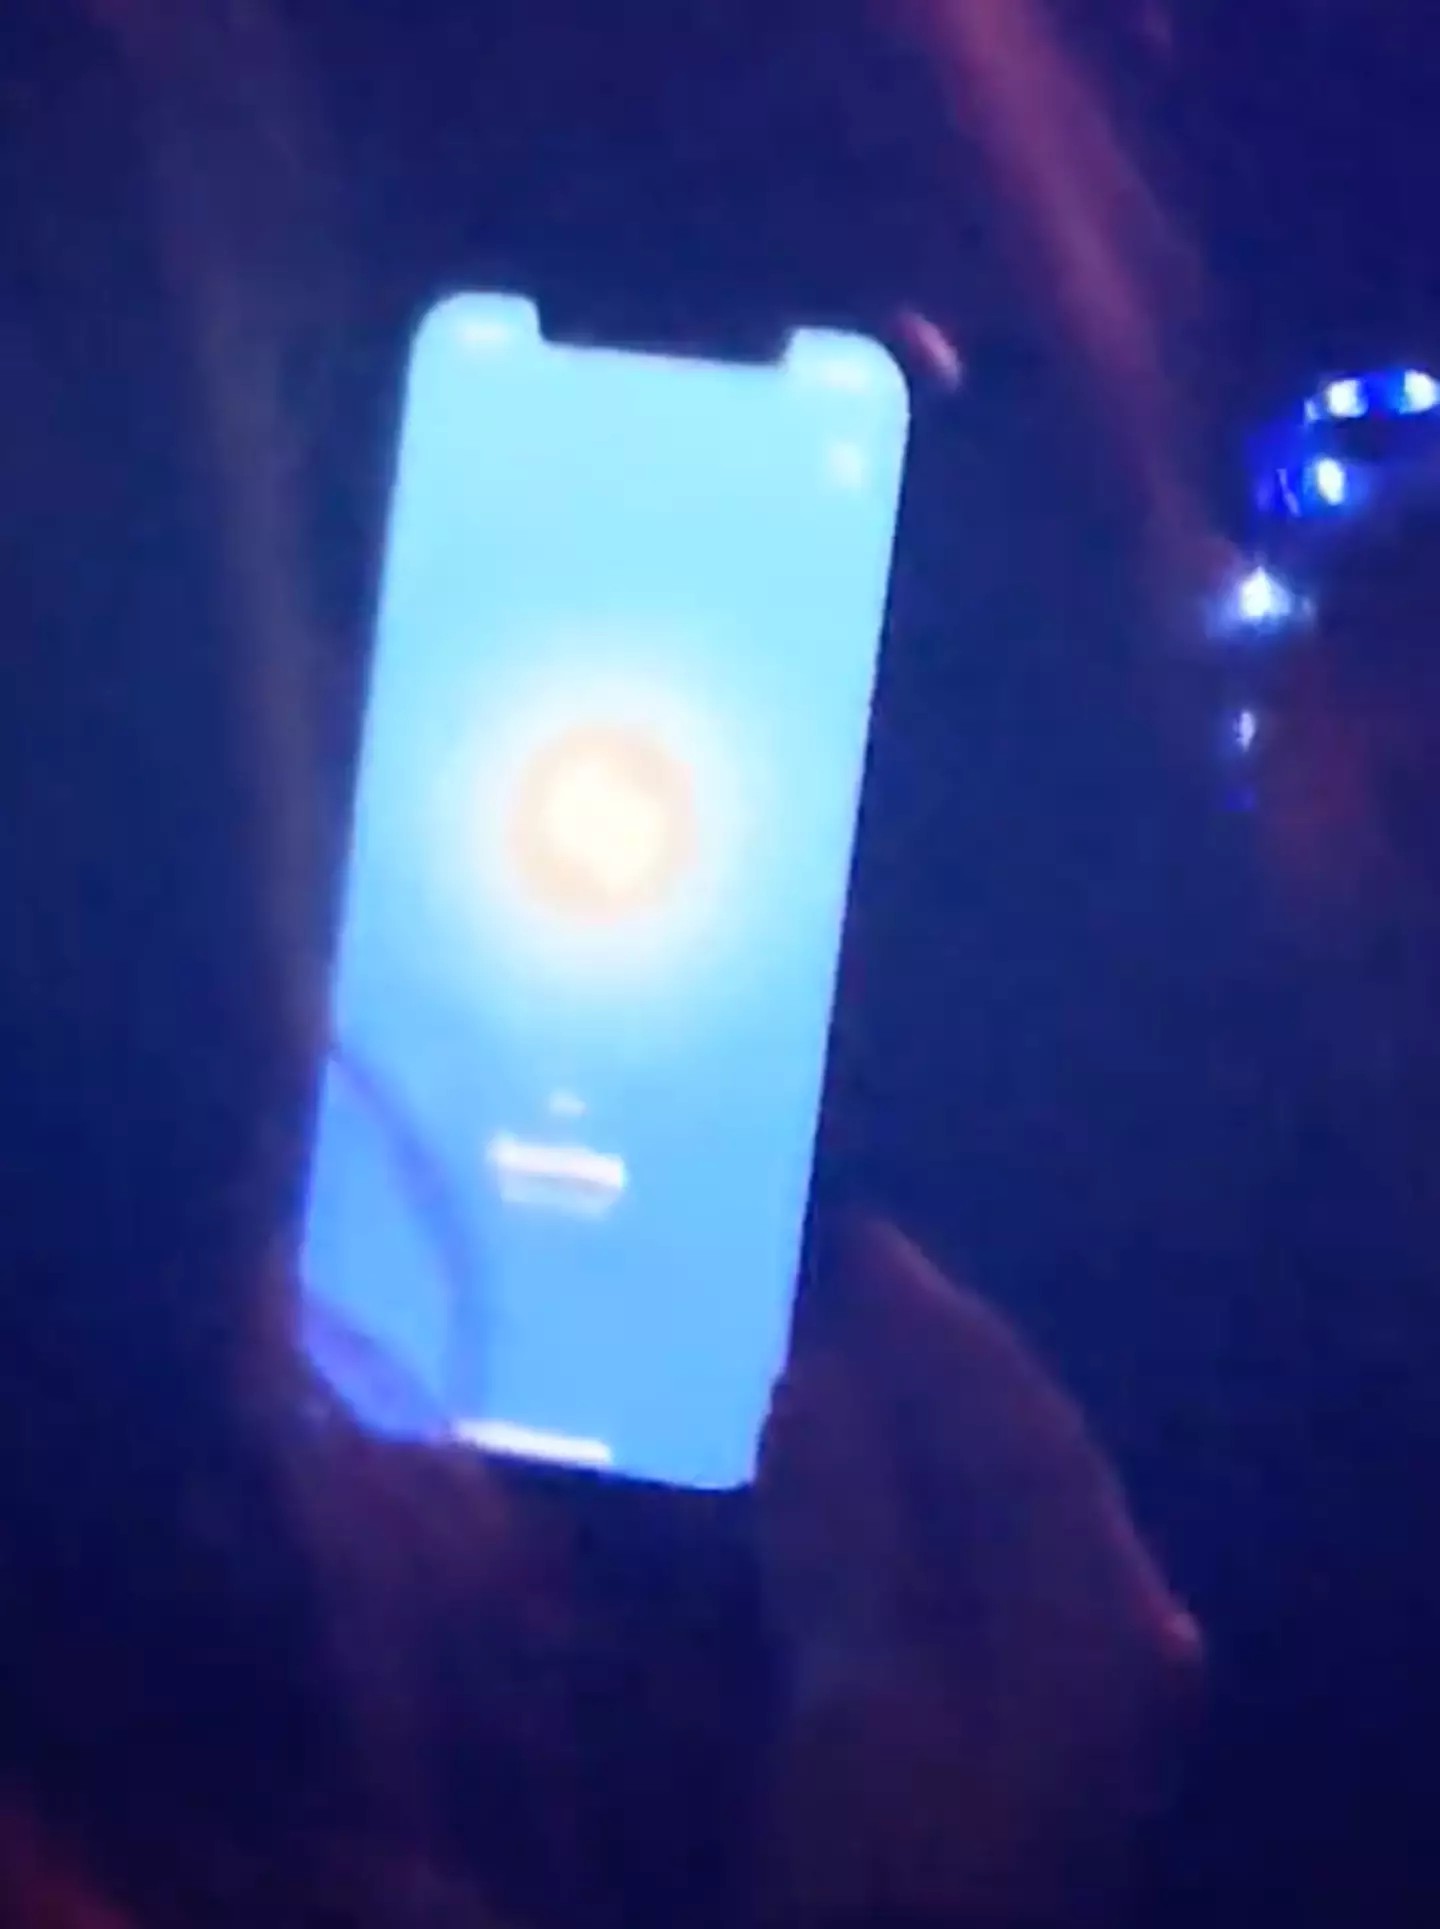 The concertgoer sought help from Shazam.